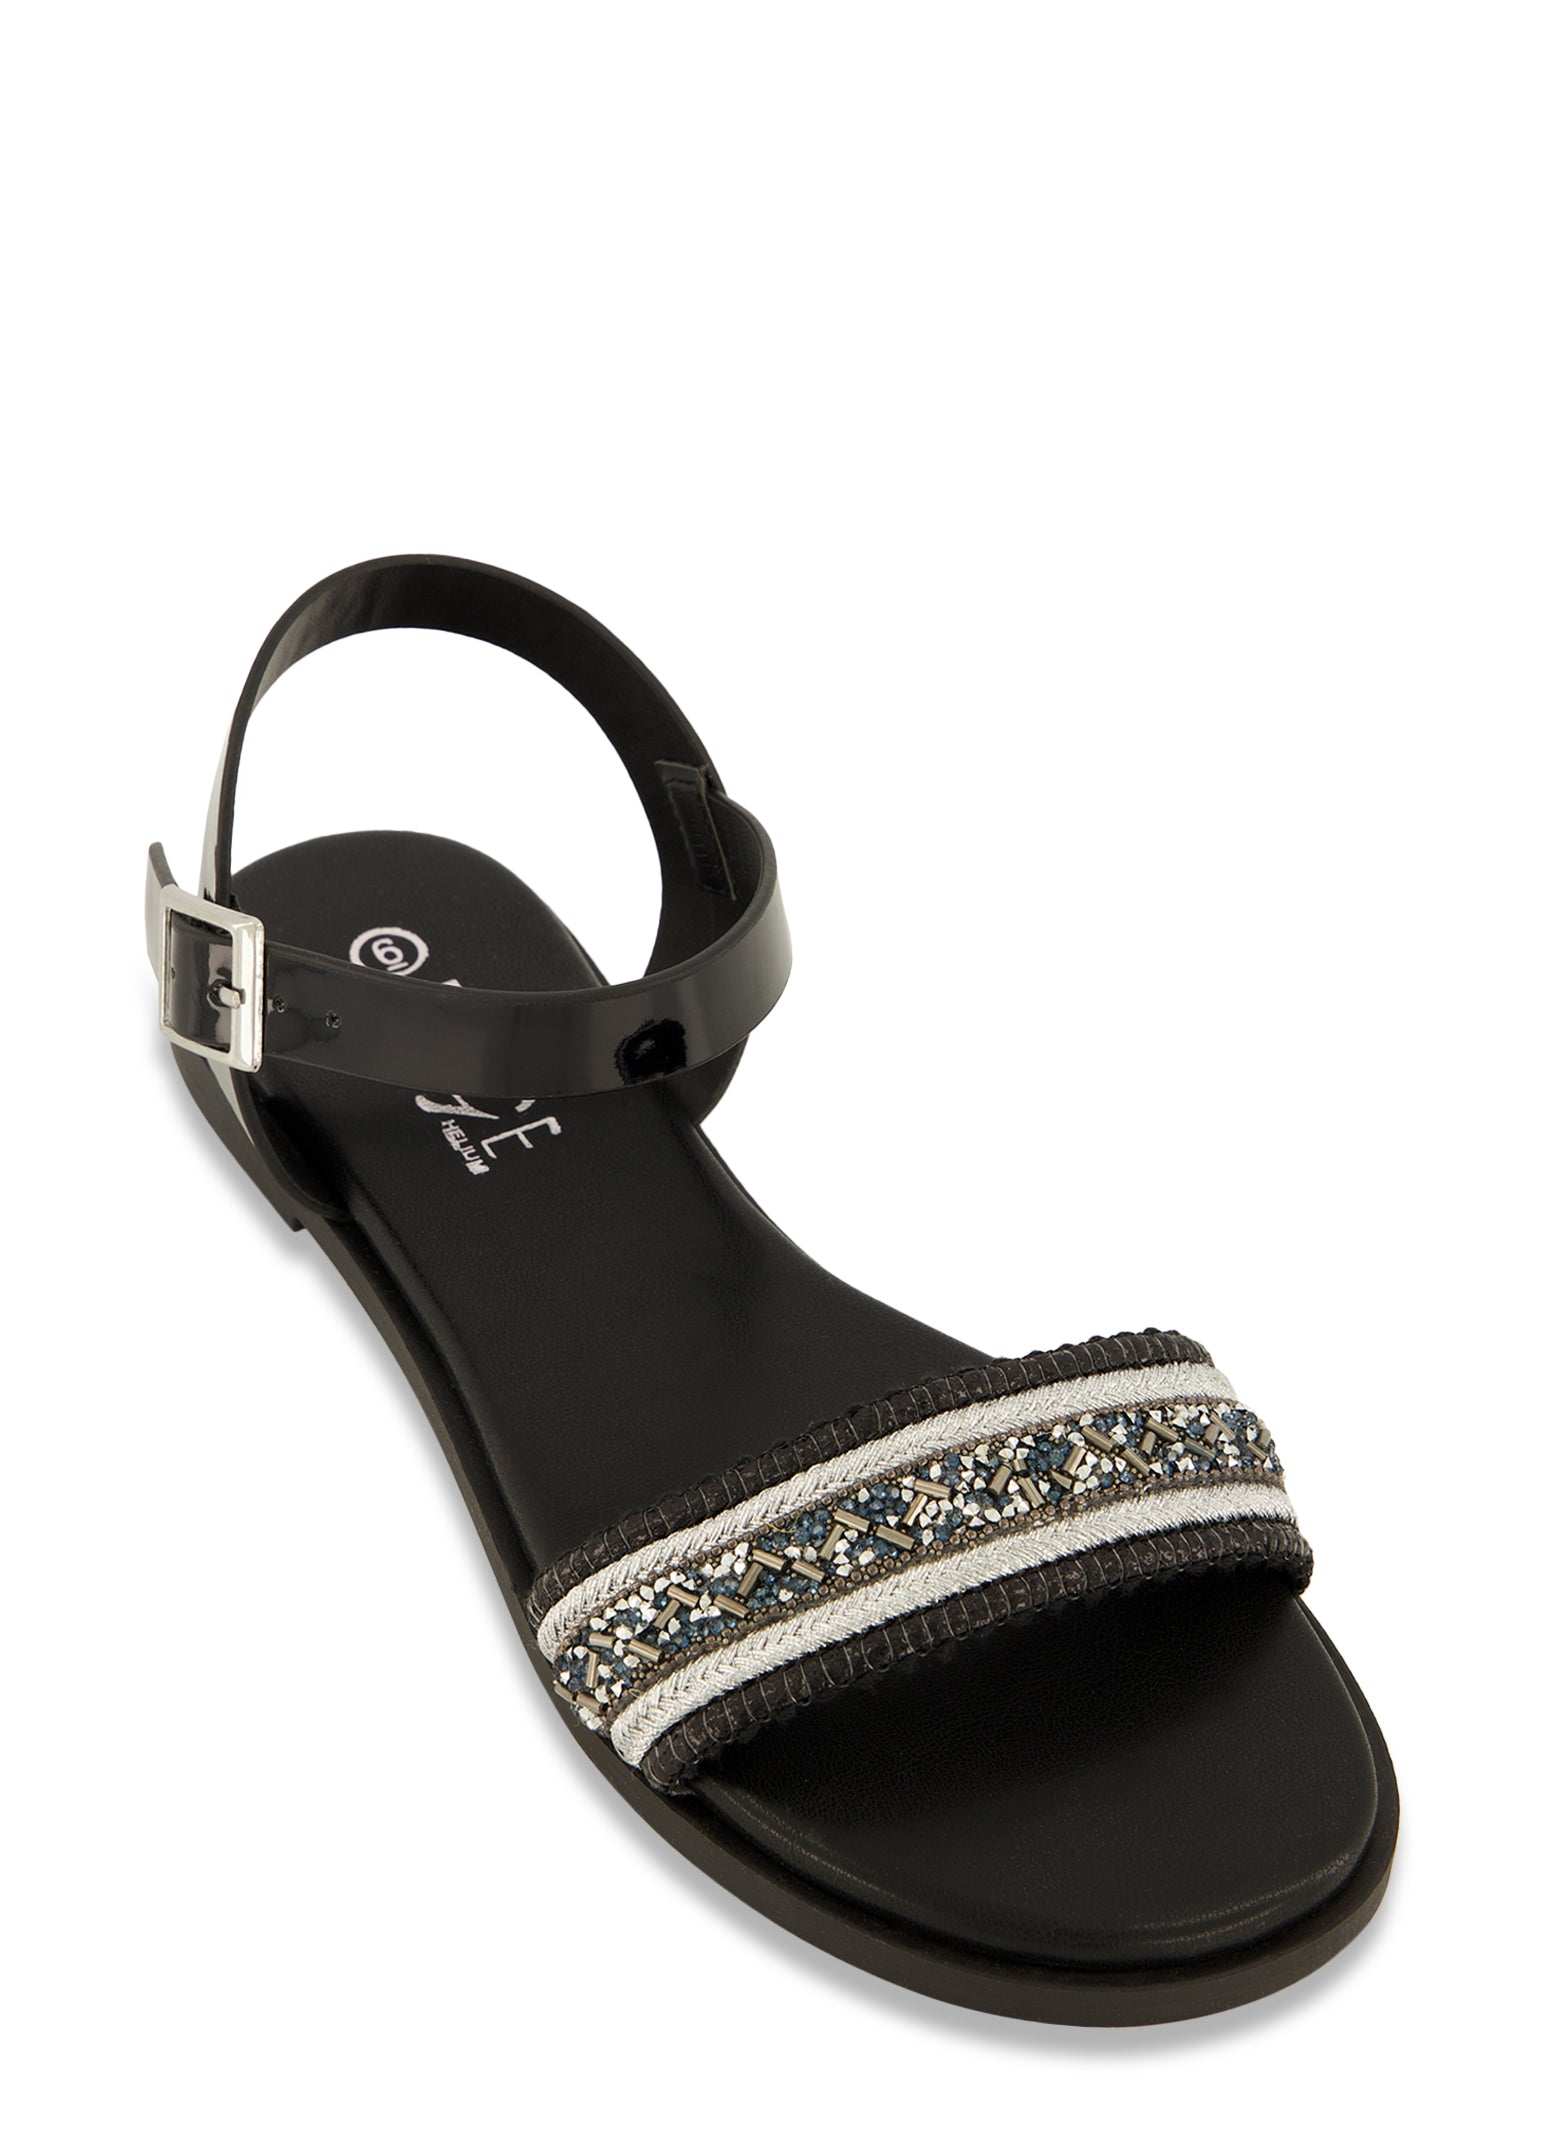 Womens Beaded Ankle Strap Flat Sandals,